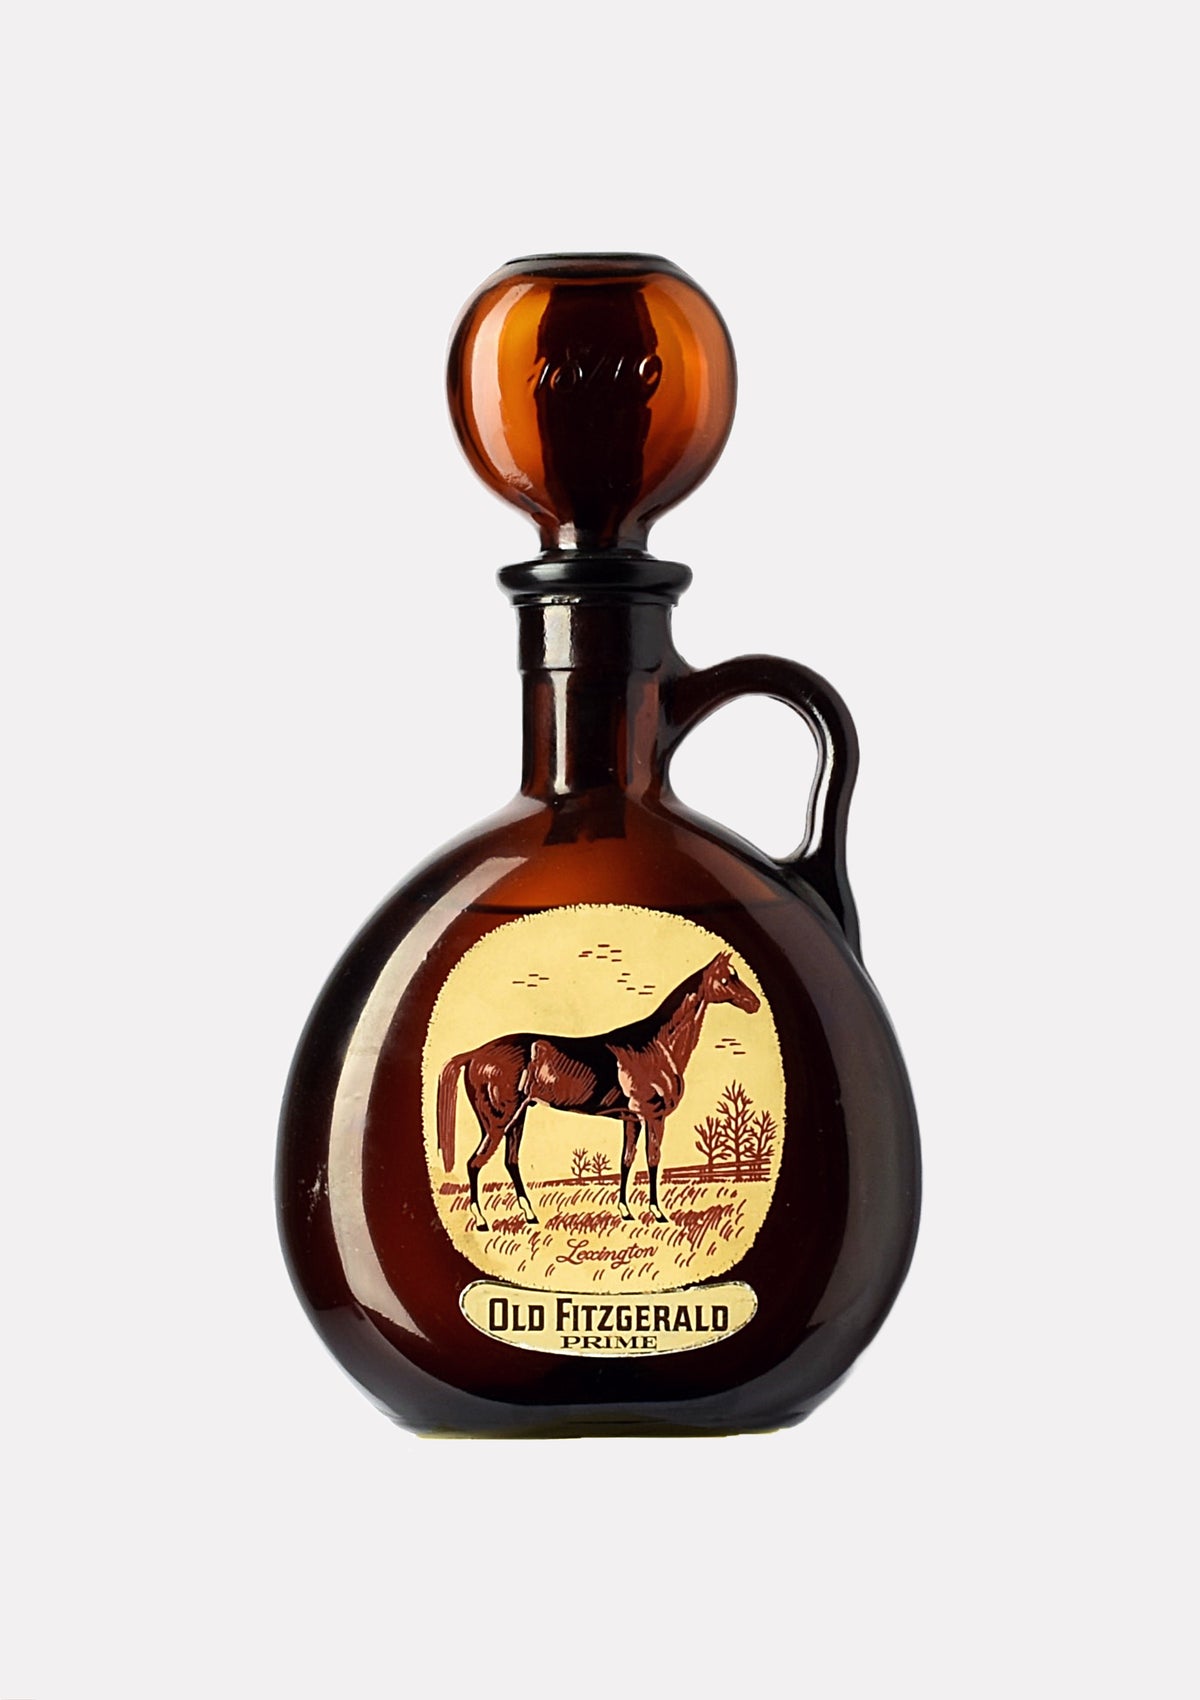 Old Fitzgerald Prime Kentucky Straight Bourbon 8 Jahre